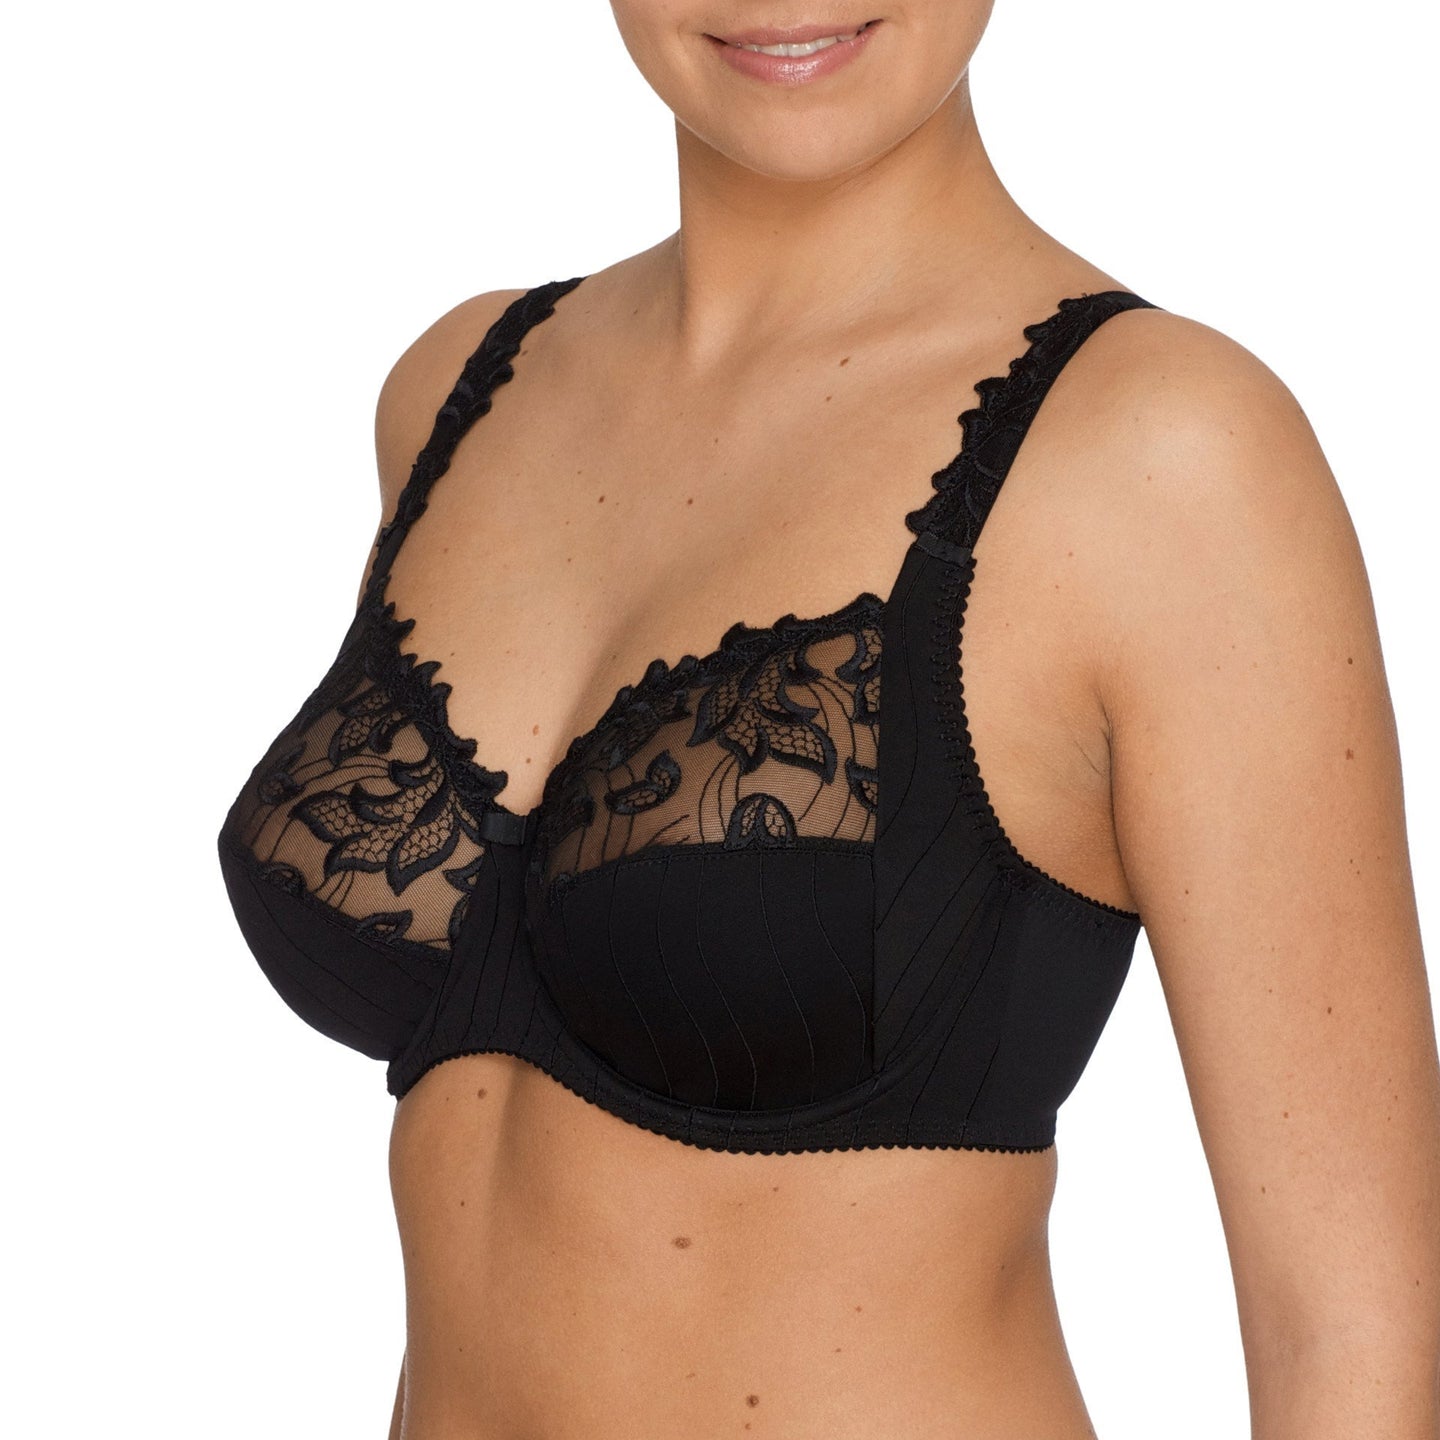 Best Seller! Three-panelled bra with an excellent fit. Decorative embroidery on the cups and straps.